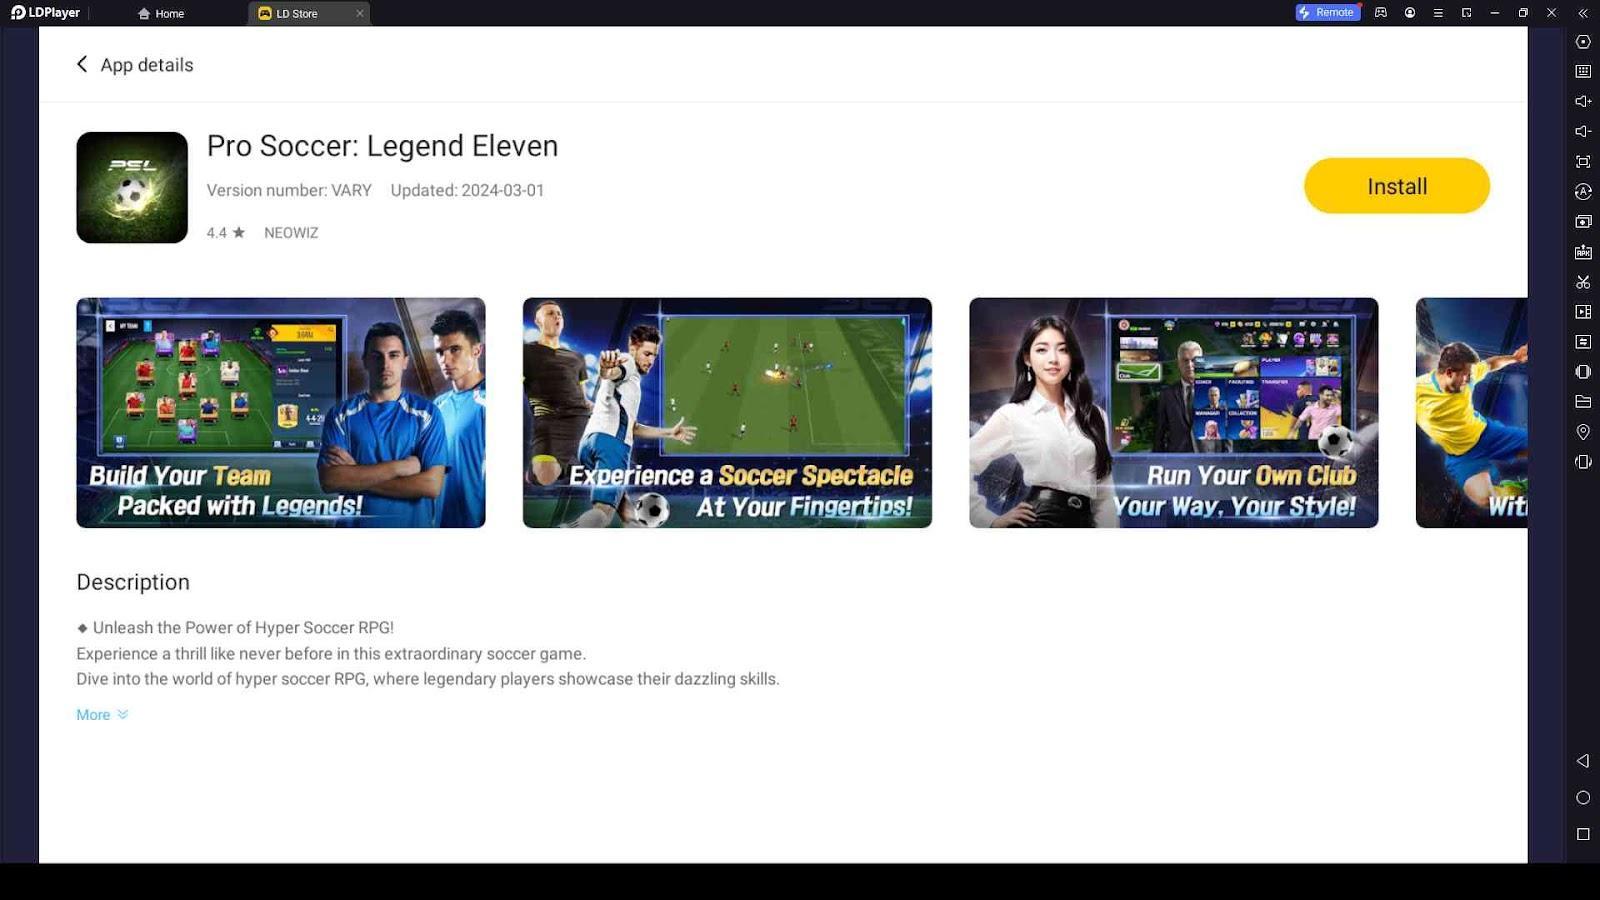 Playing Pro Soccer: Legend Eleven on LDPlayer